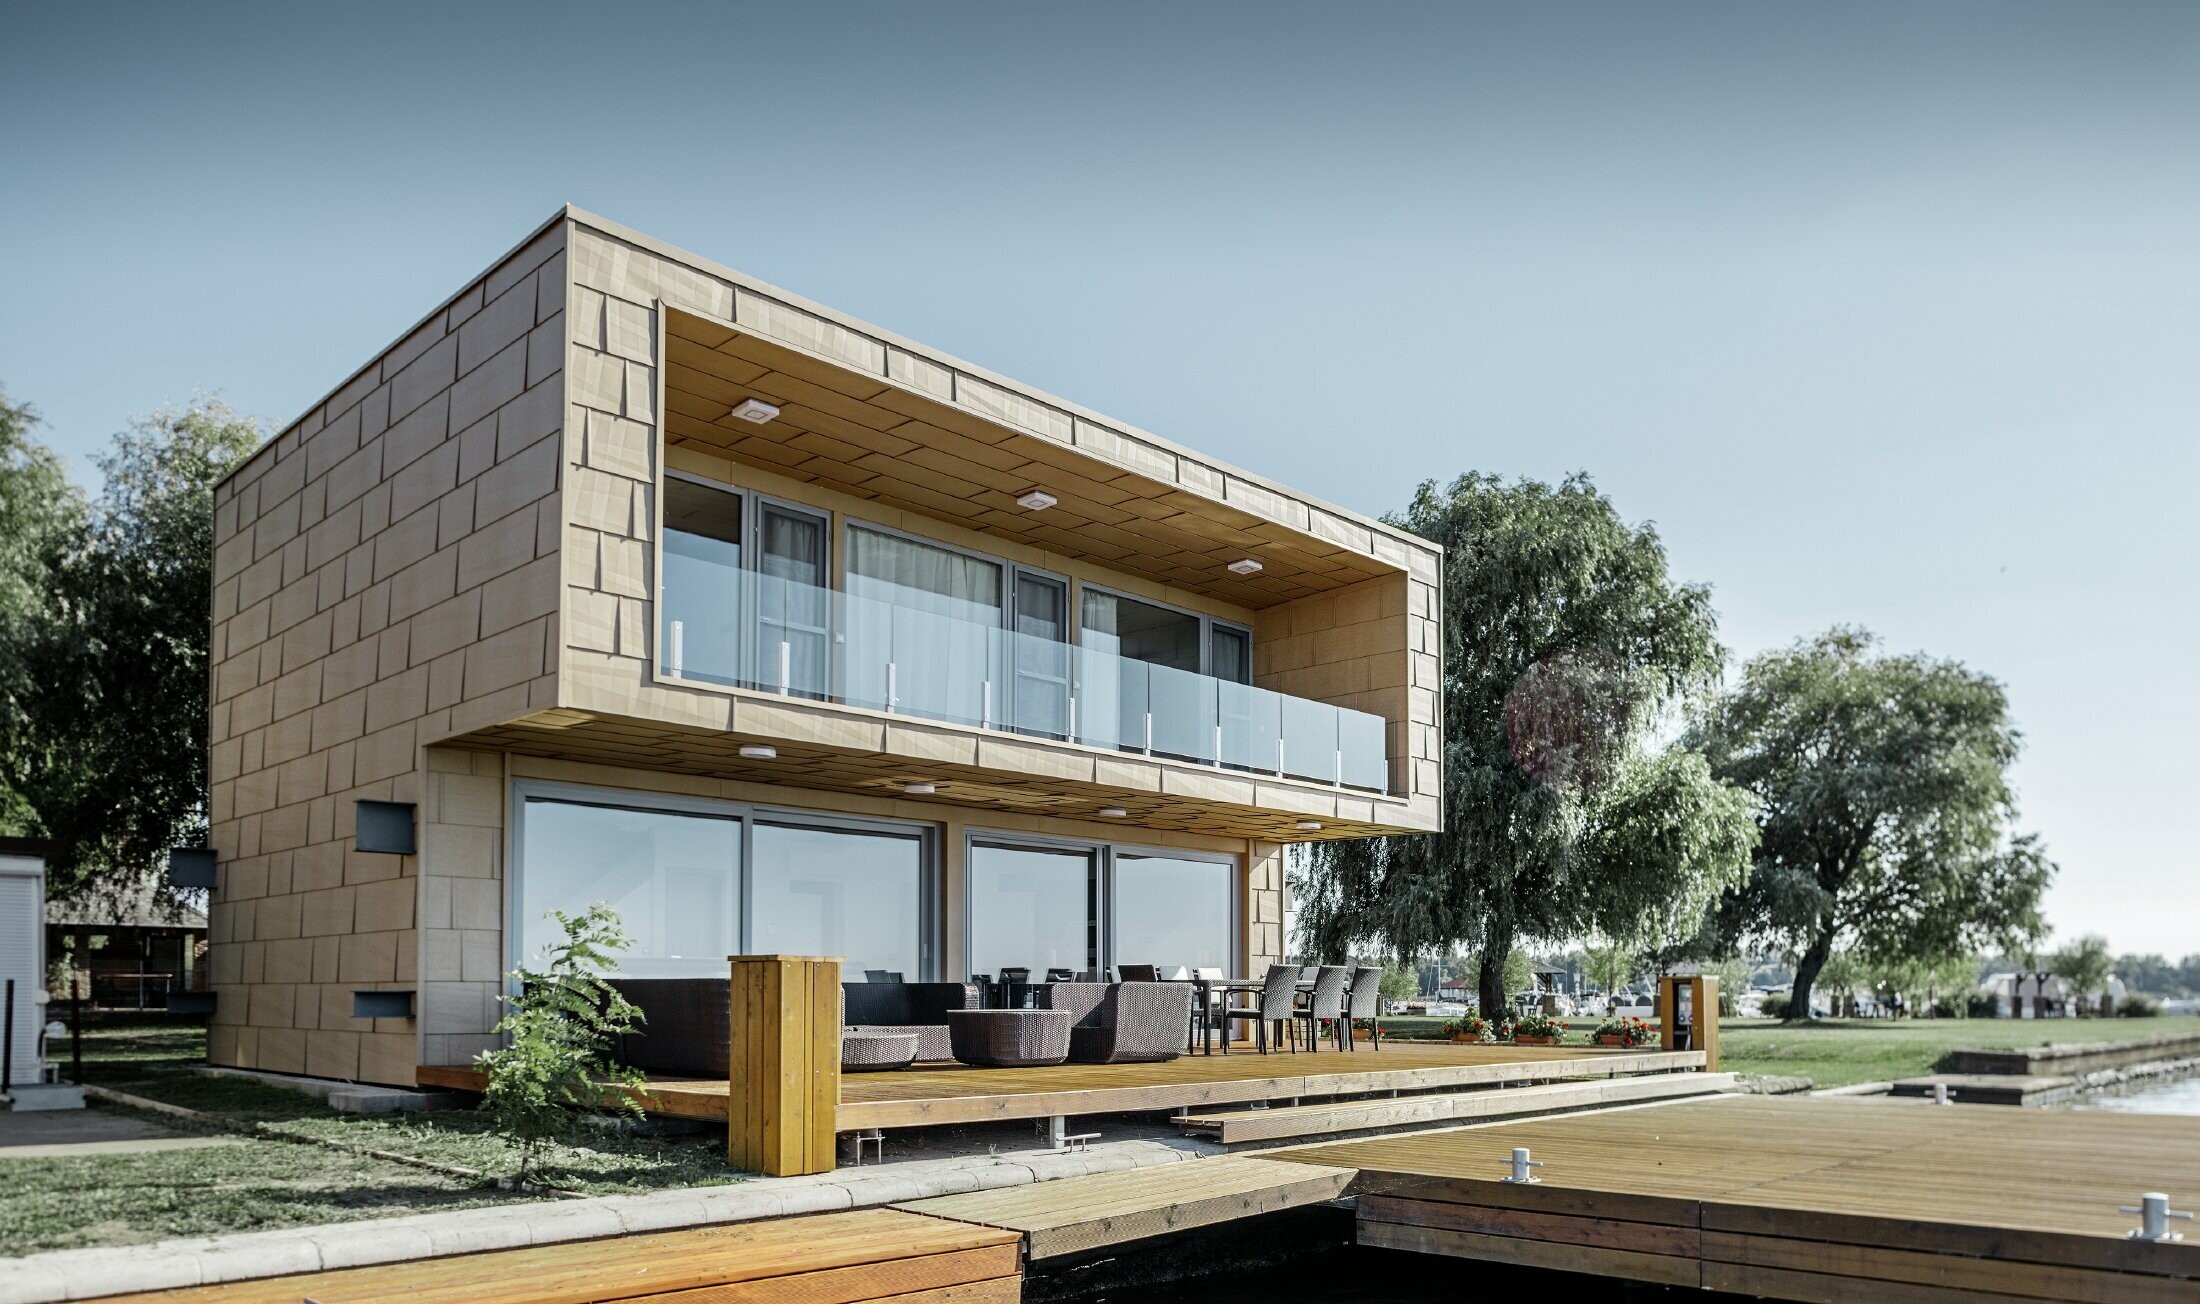 Modern lakeside weekend residence with a flat roof, large windows and a canted aluminium façade in sand brown